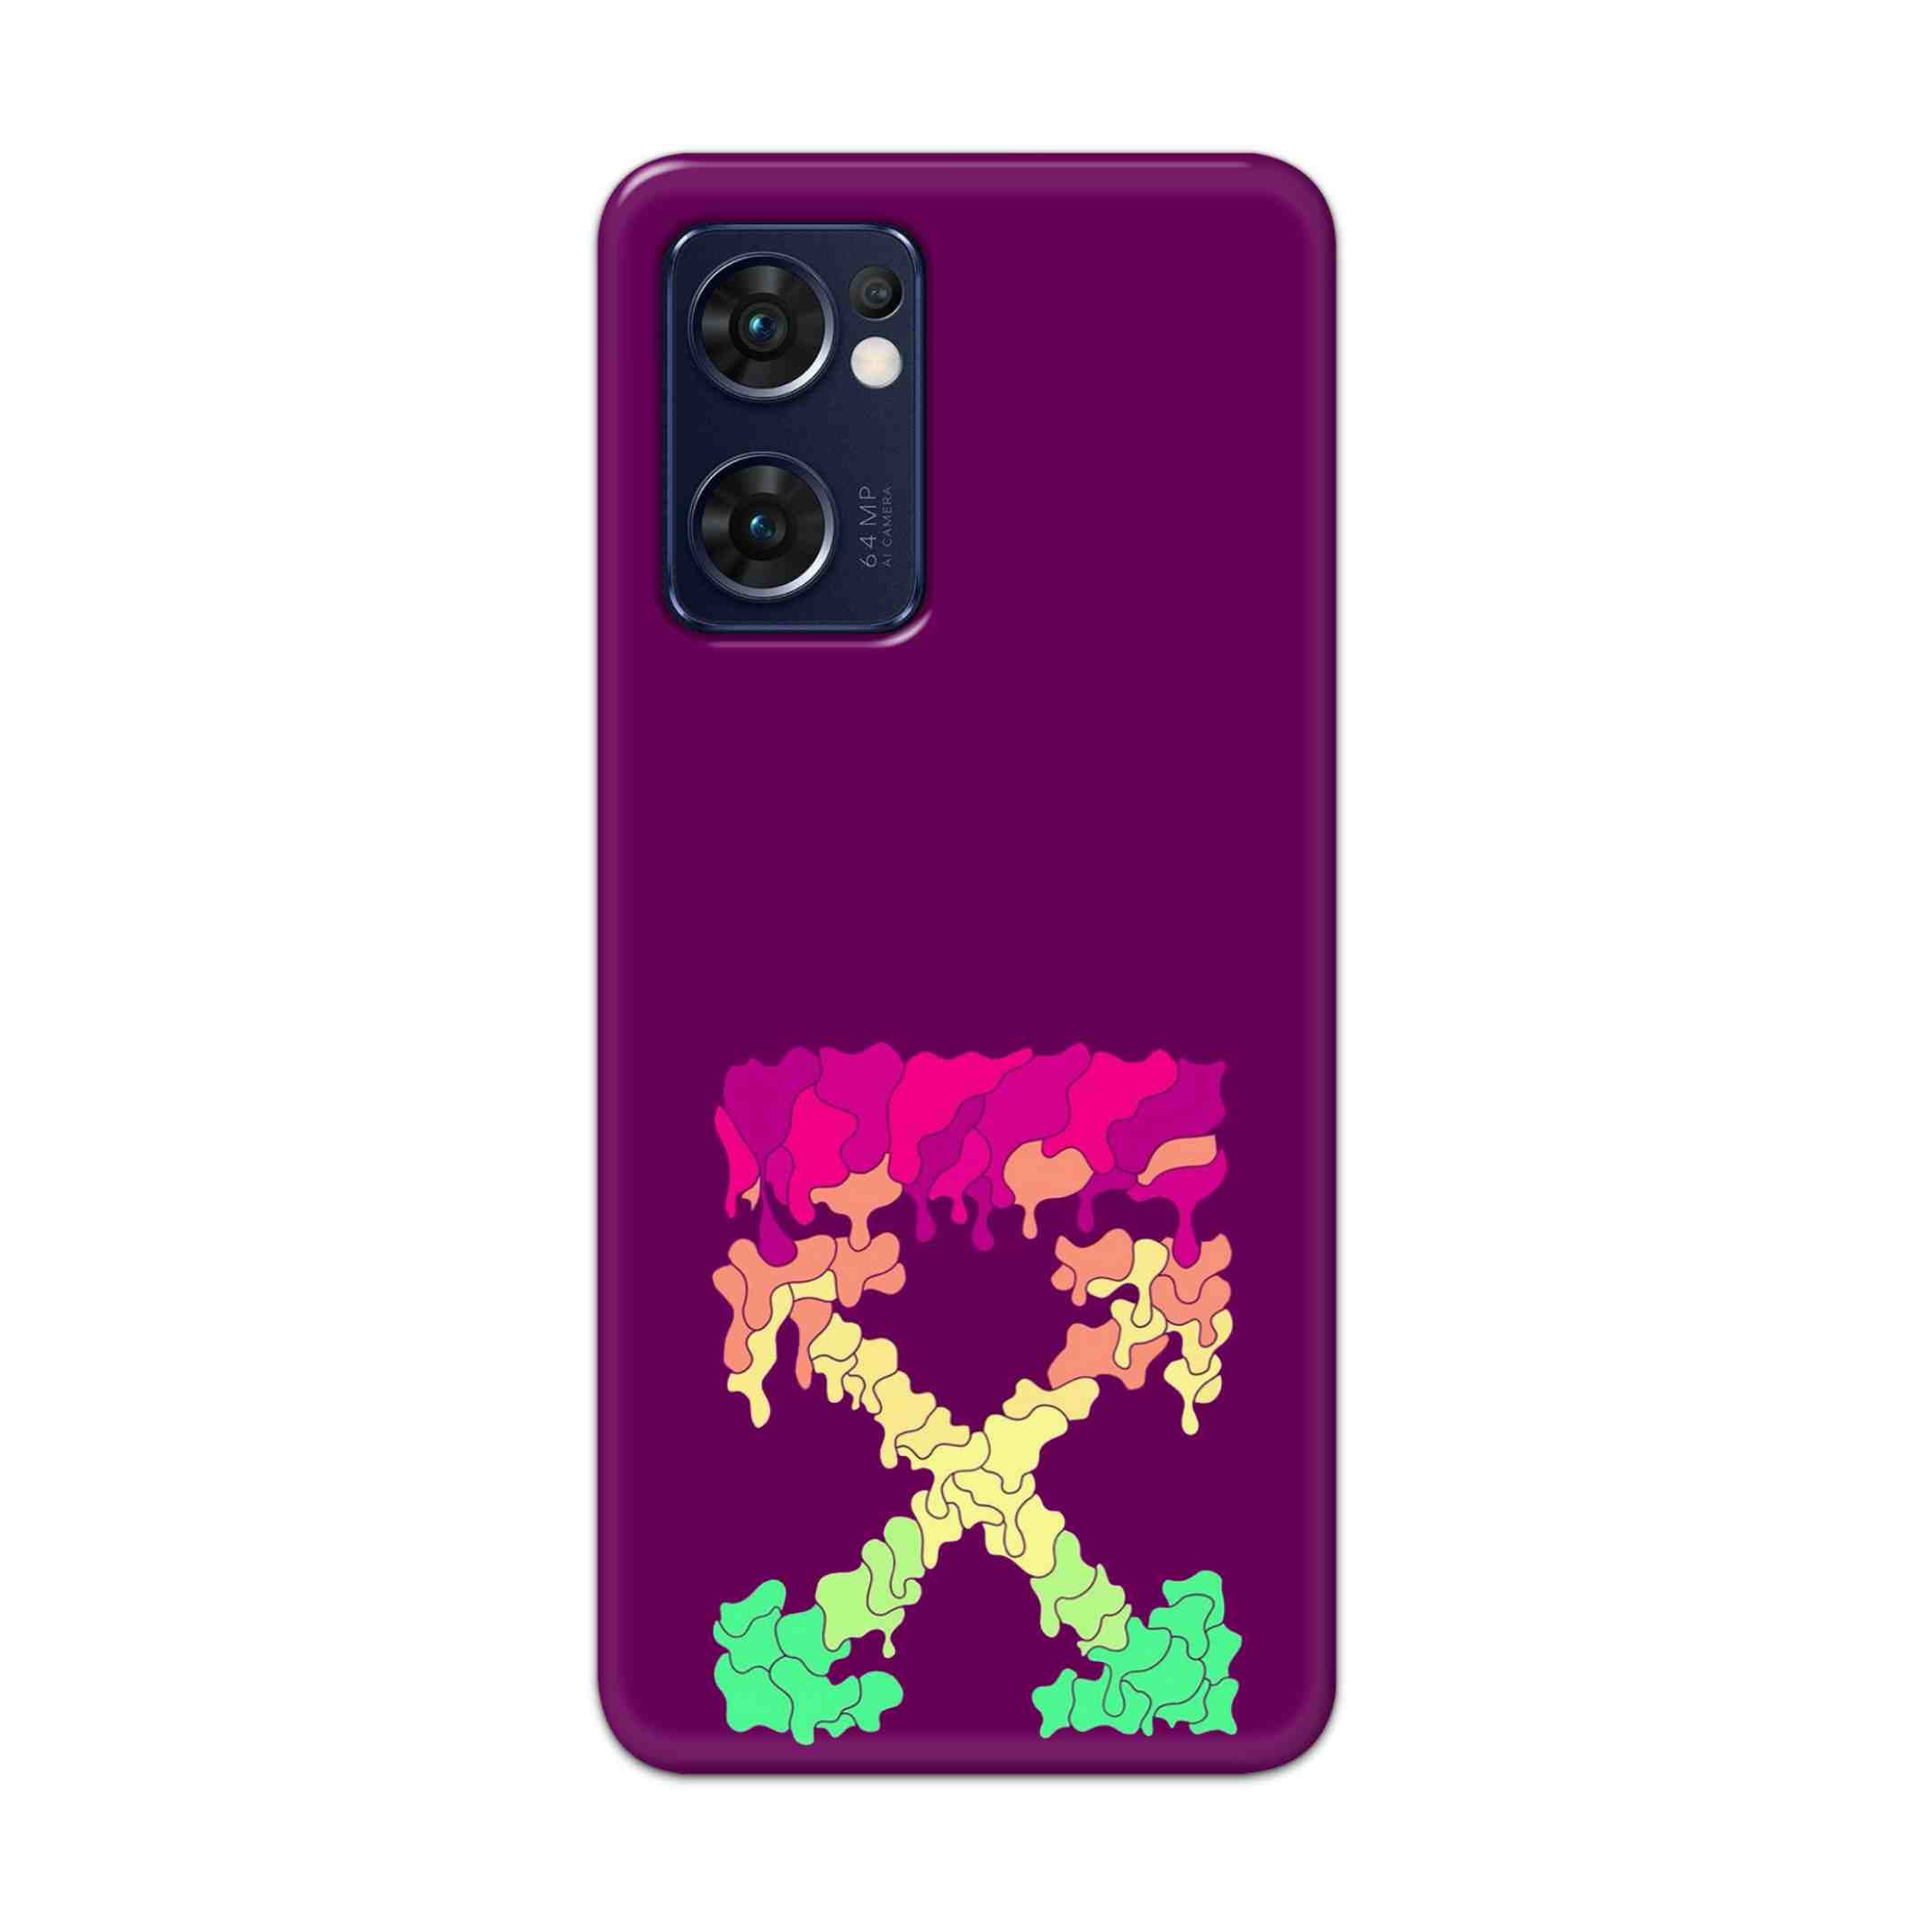 Buy X.O Hard Back Mobile Phone Case Cover For Reno 7 5G Online